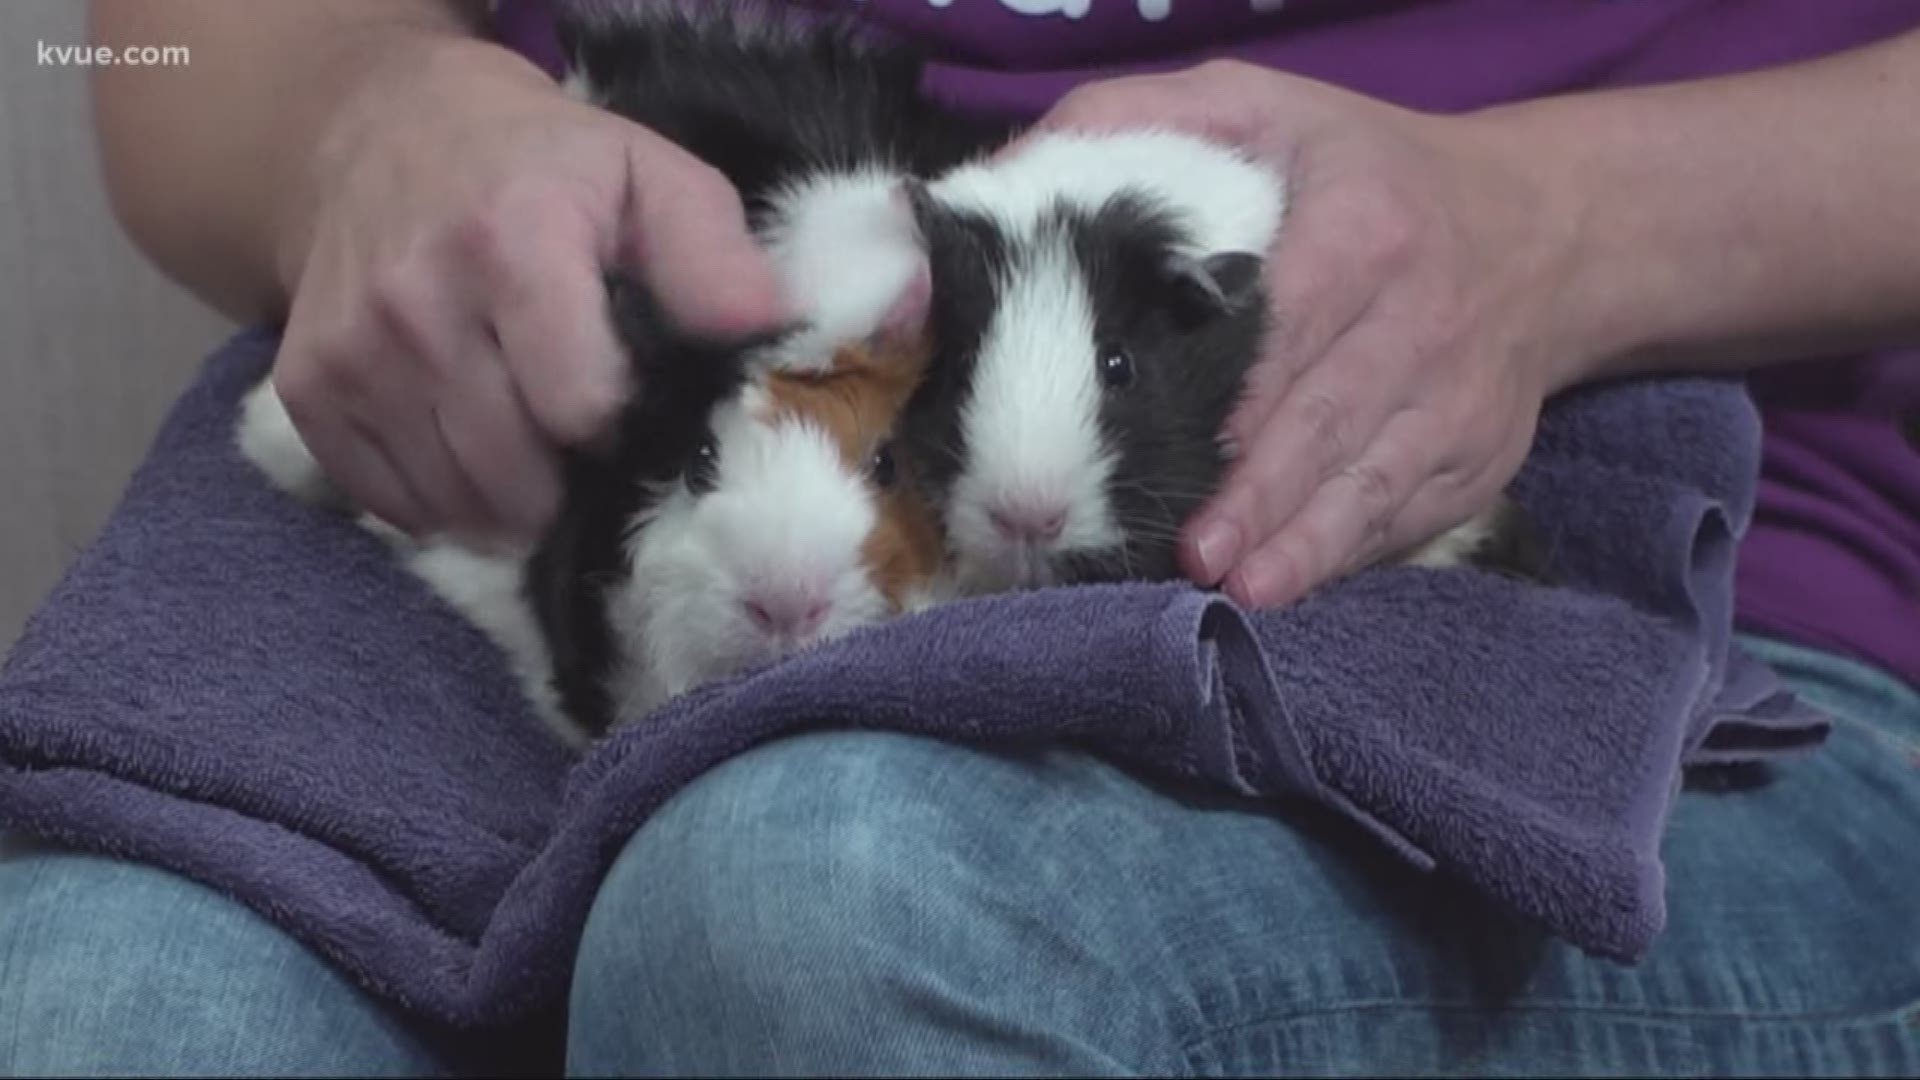 Joining us is Lucia Summers with Austin Guinea Pig Rescue and she's brought along Rosie and Jellybean.